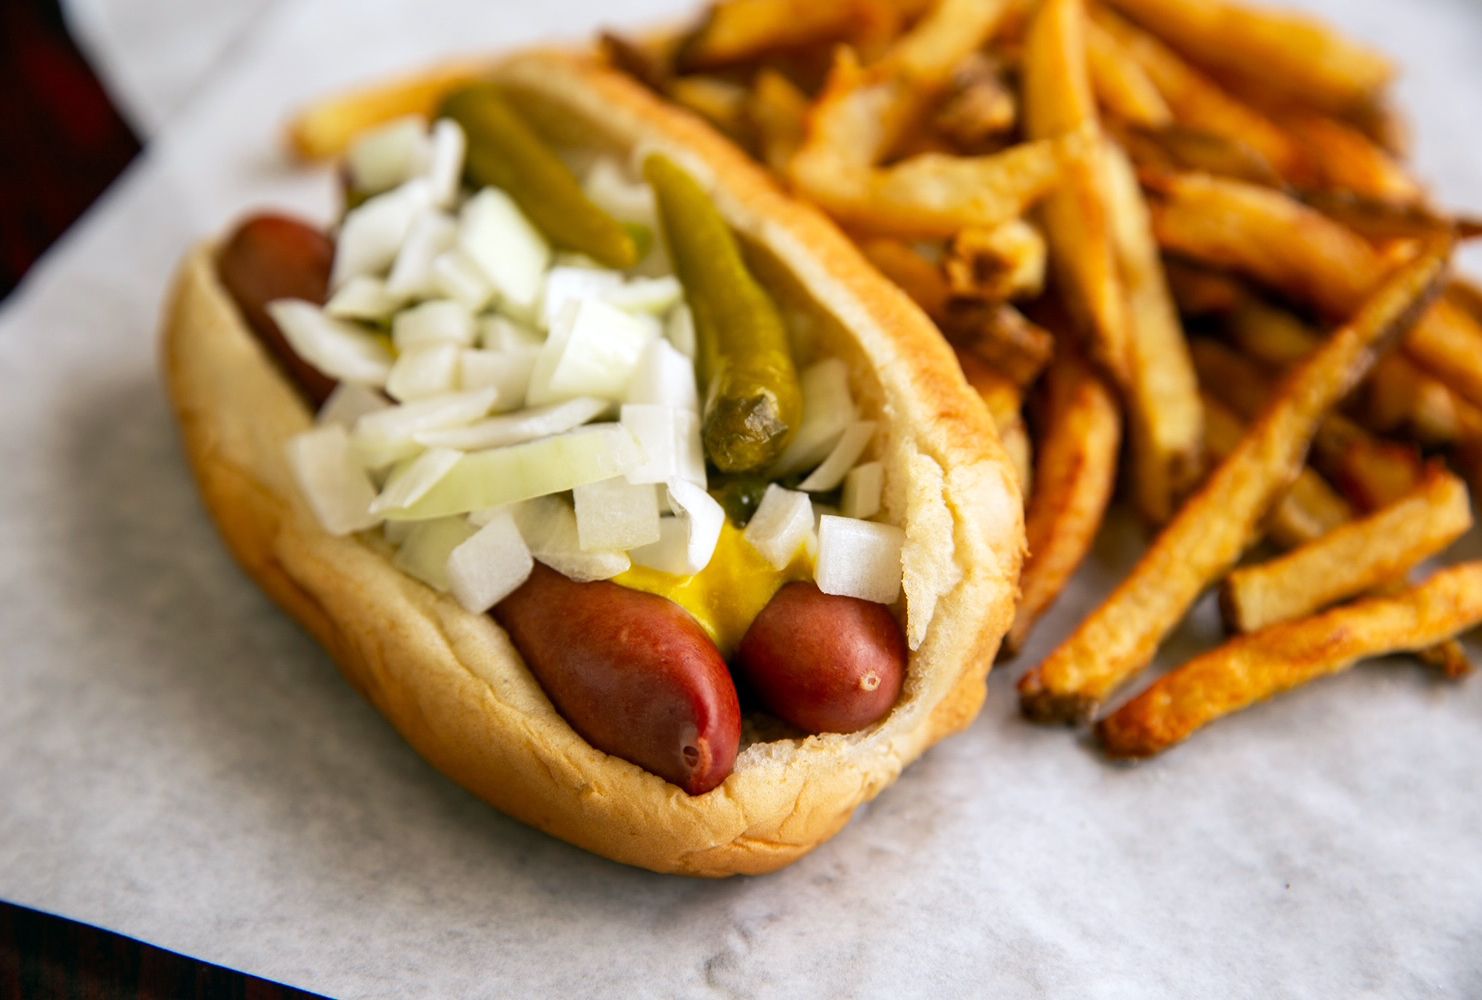 A Local’s Guide to the Best Hot Dogs in Chicago [Video]